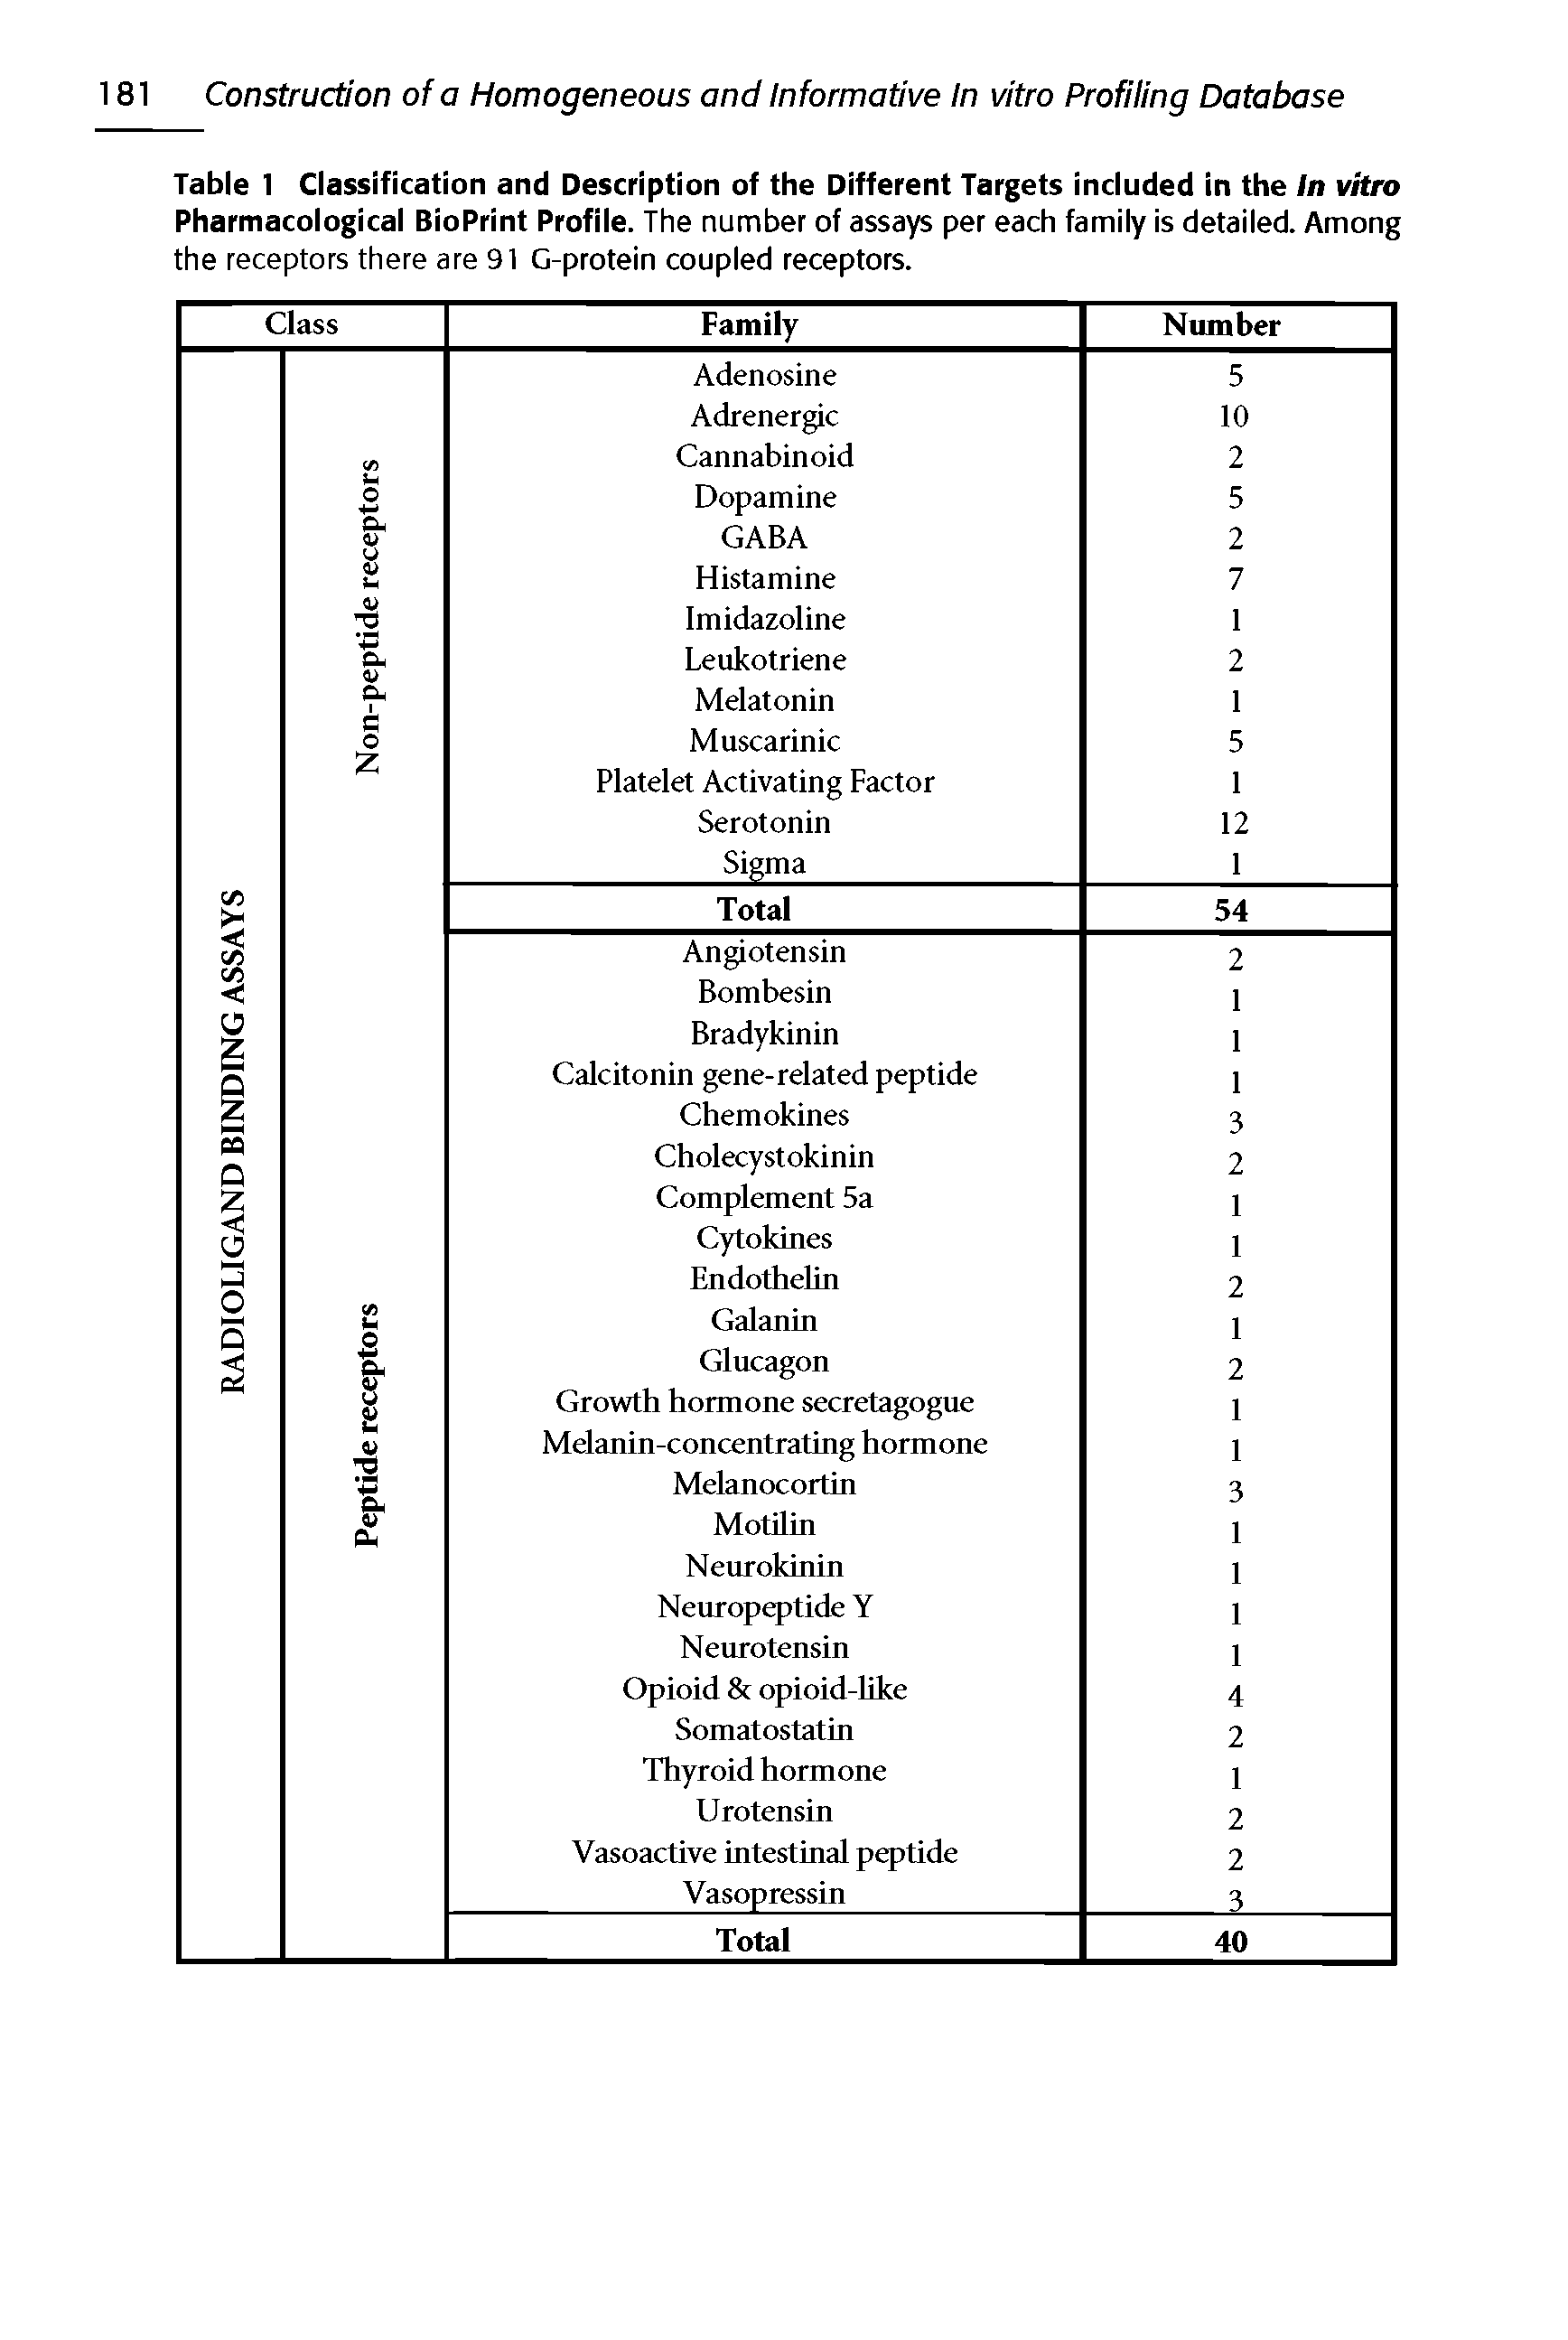 Table 1 Classification and Description of the Different Targets included in the In vitro Pharmacological BioPrint Profile. The number of assays per each family is detailed. Among the receptors there are 91 G-protein coupled receptors.